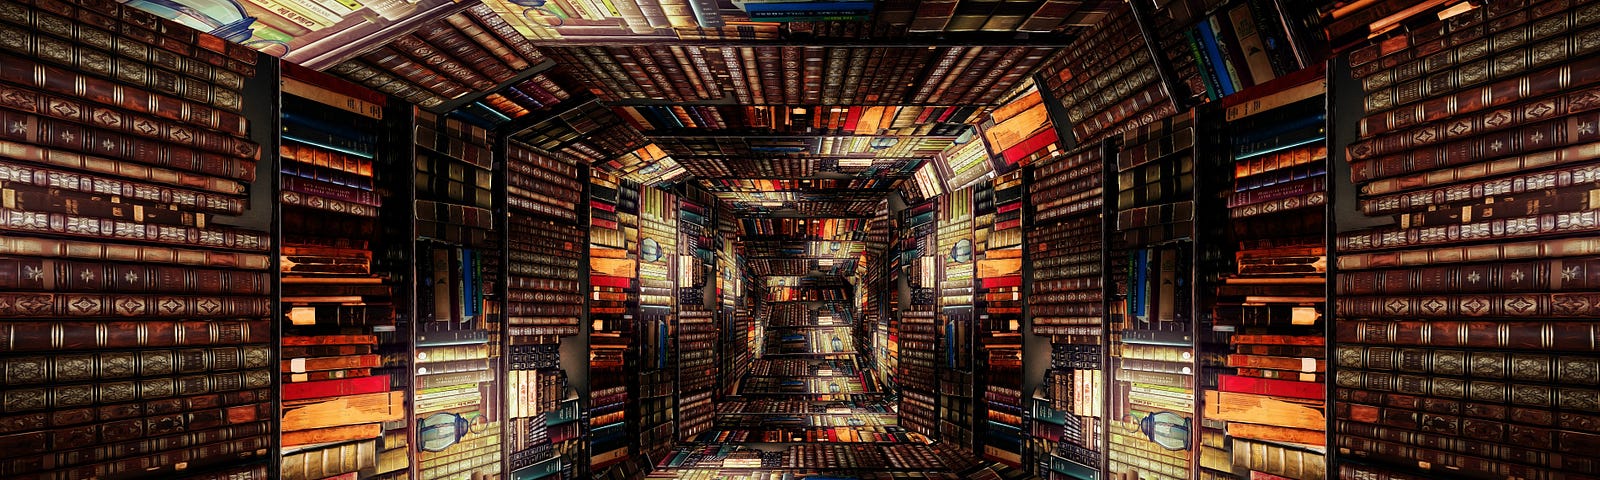 Photographic manipulation of library to appear as luminous, square-shaped tunnel.